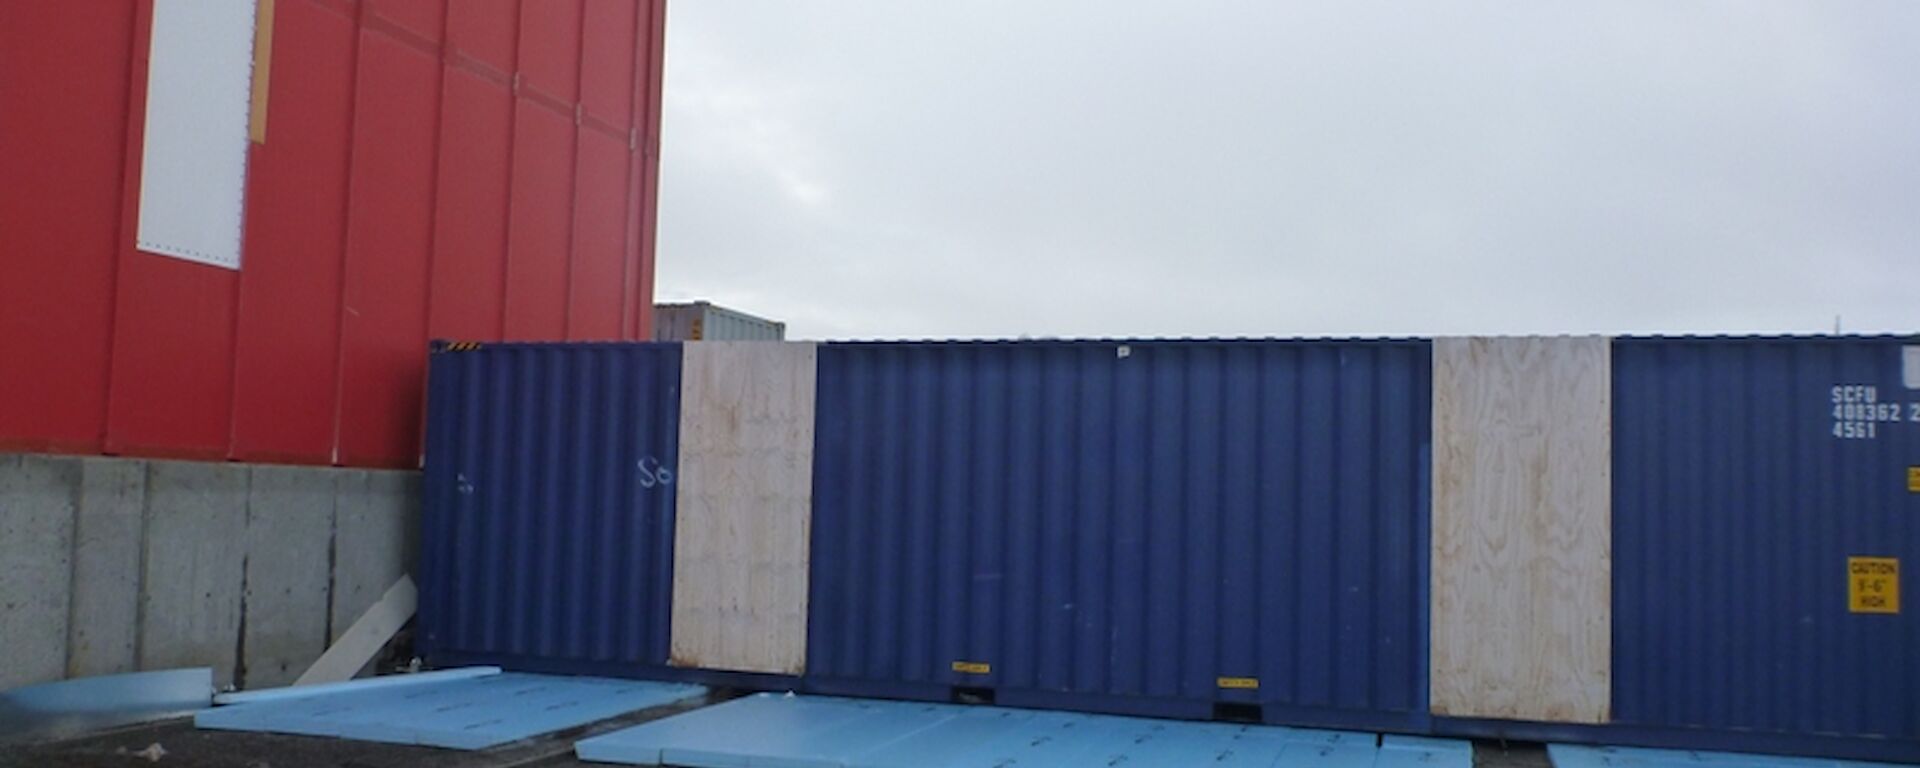 The first containers that form the building blocks of the new east wing have been put in place